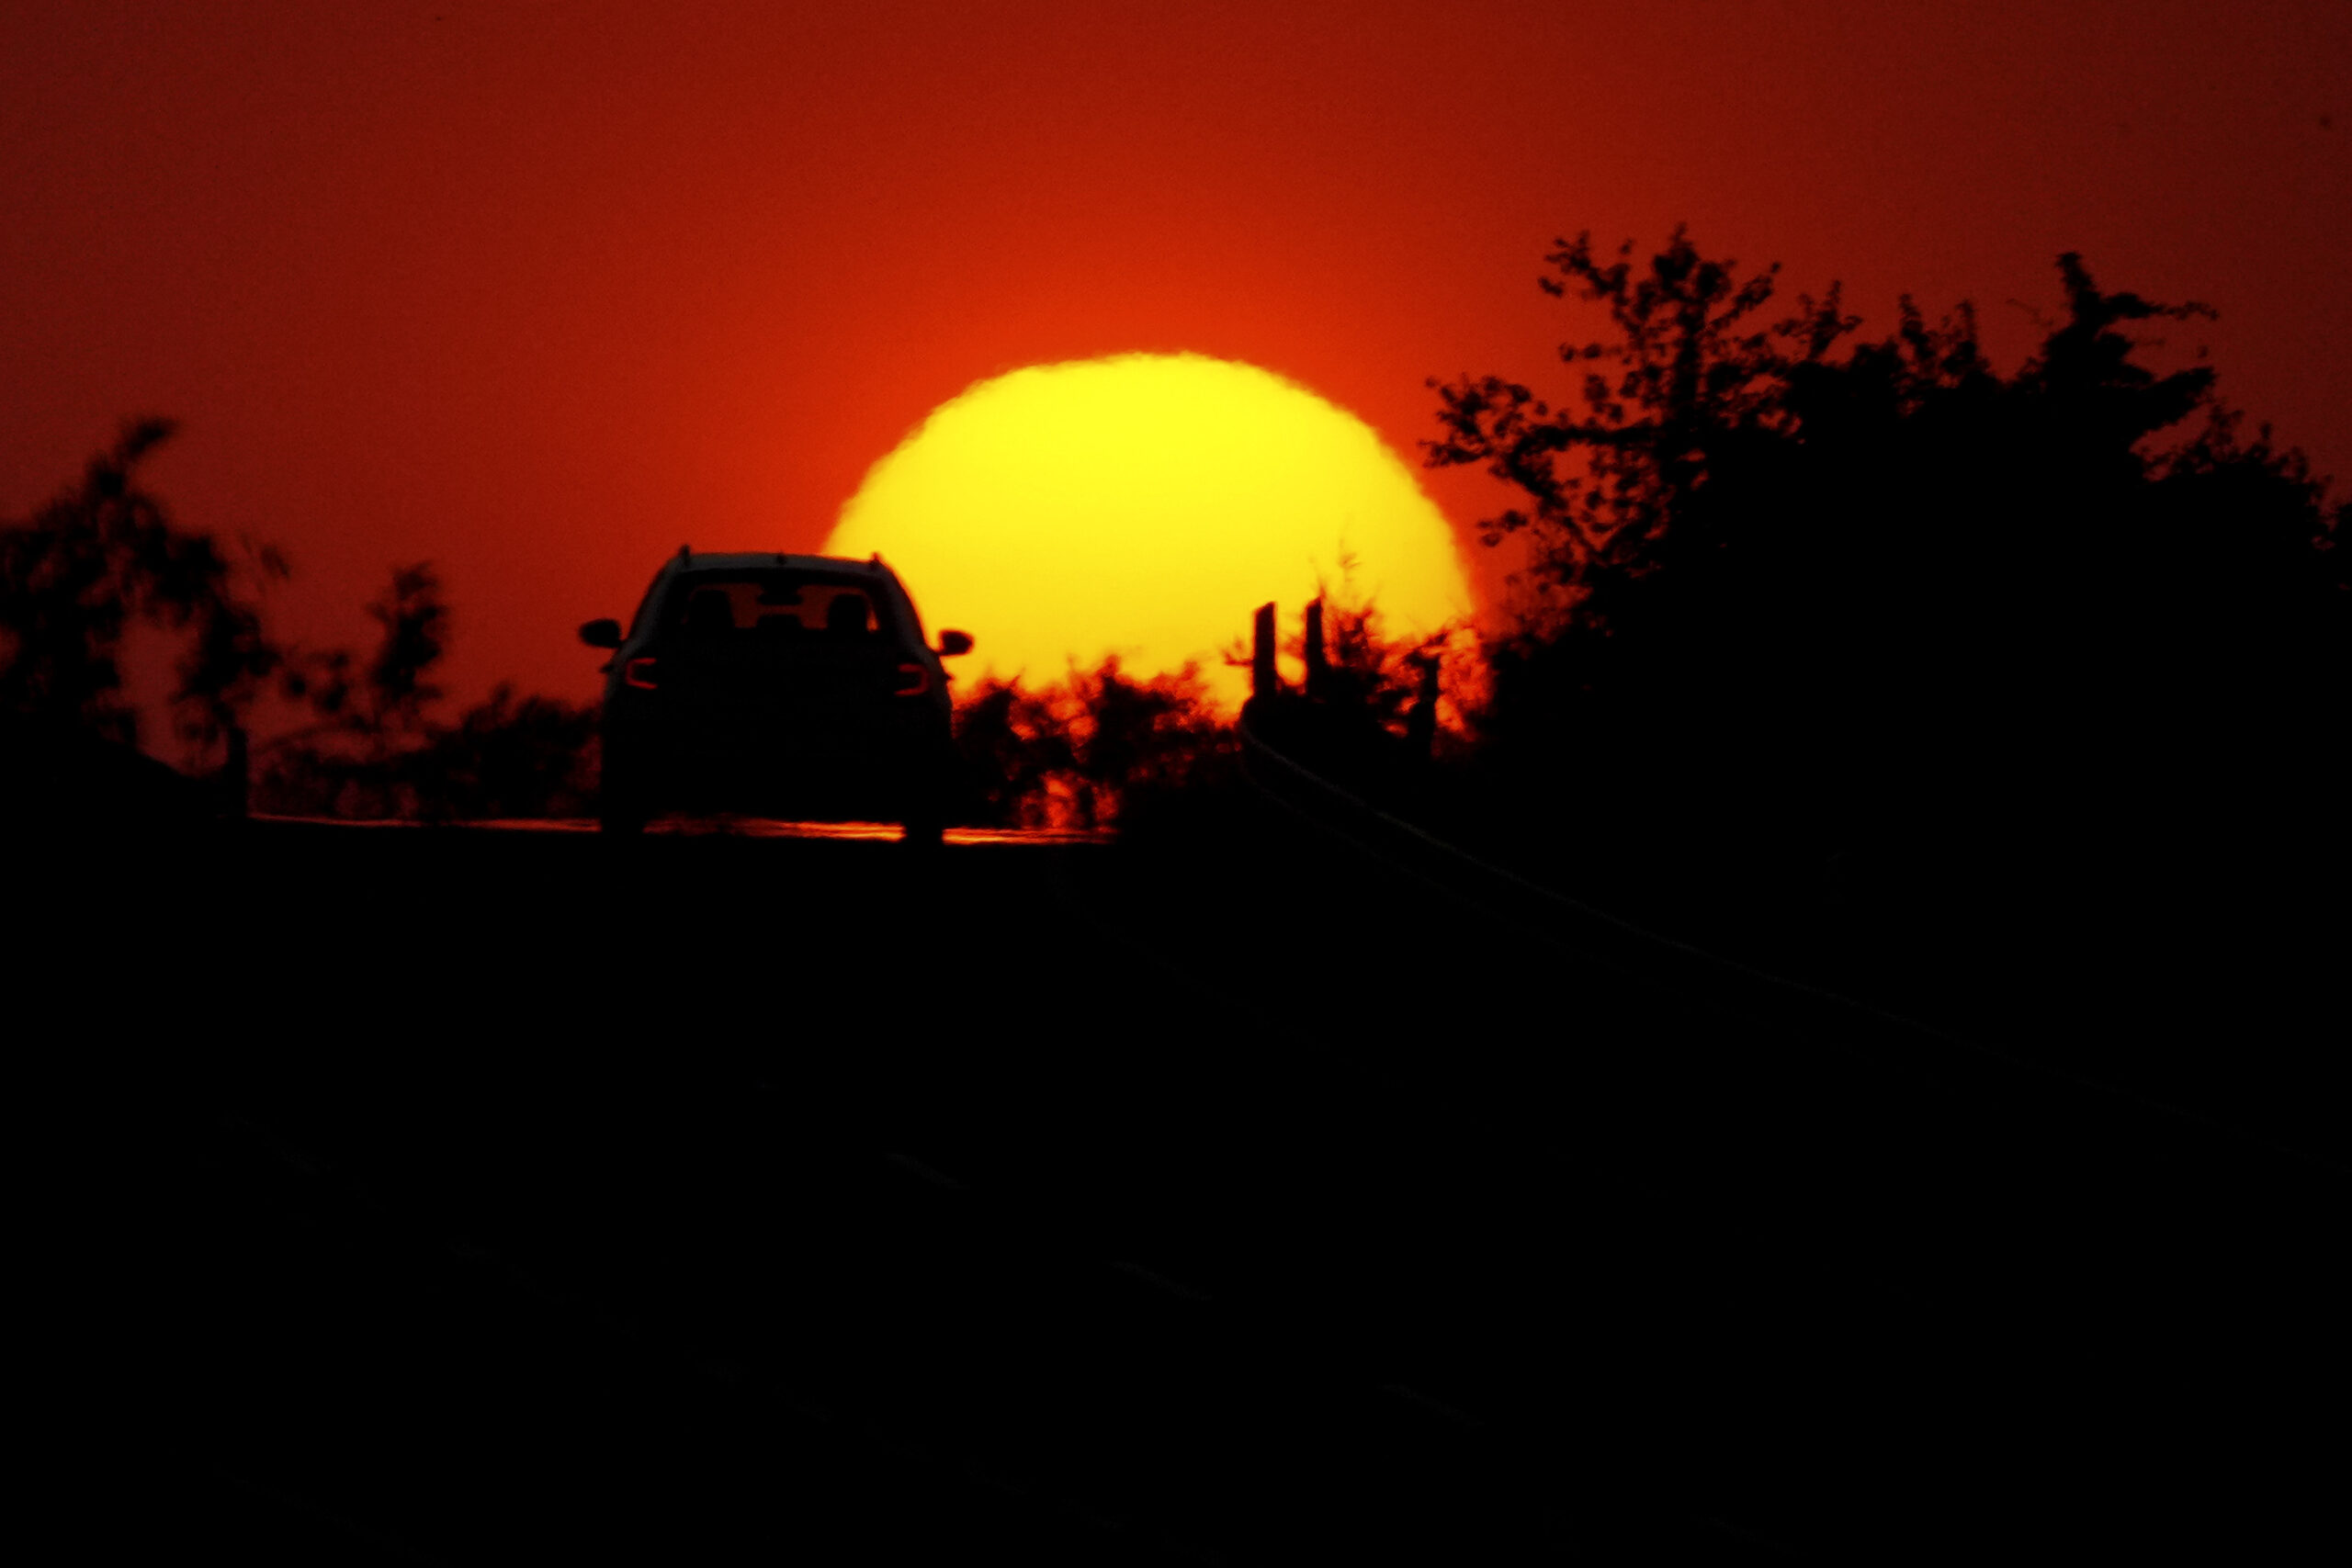 Bright yellow sun sets in orange sky as car drives